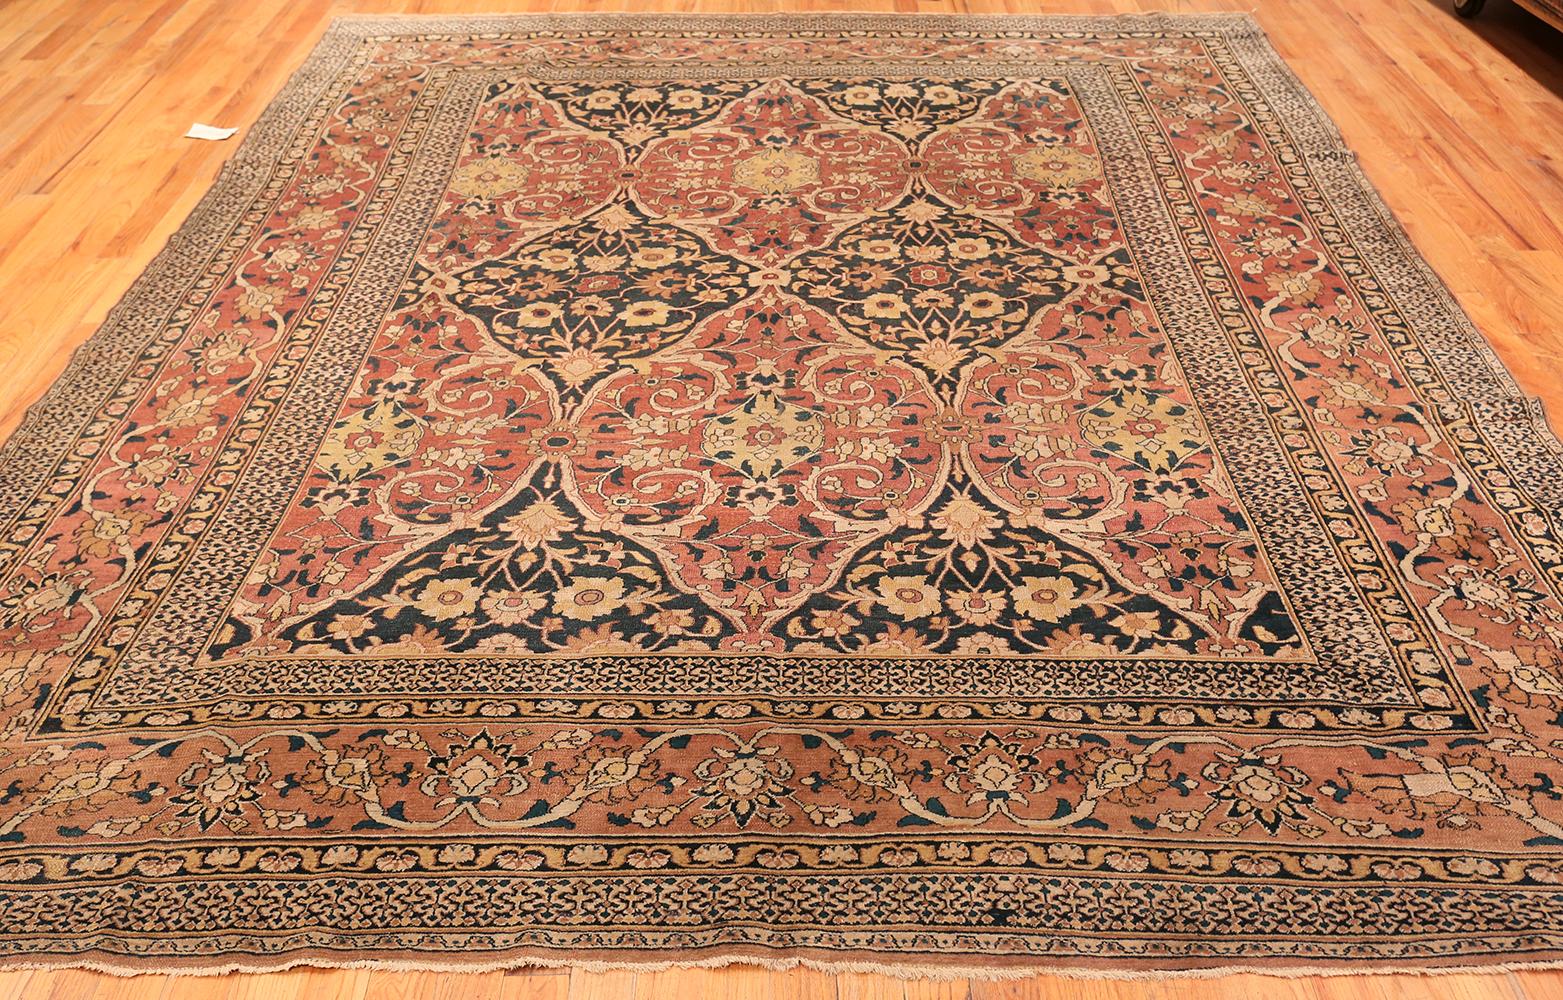 Antique room sized Persian Khorasan carpet, origin country: Persia, circa: 1900. Size: 9 ft 9 in x 12 ft (2.97 m x 3.66 m).  

Exquisite complexity and flawless symmetry define this elegant carpet. Woven by hand in the Khorassan province of eastern